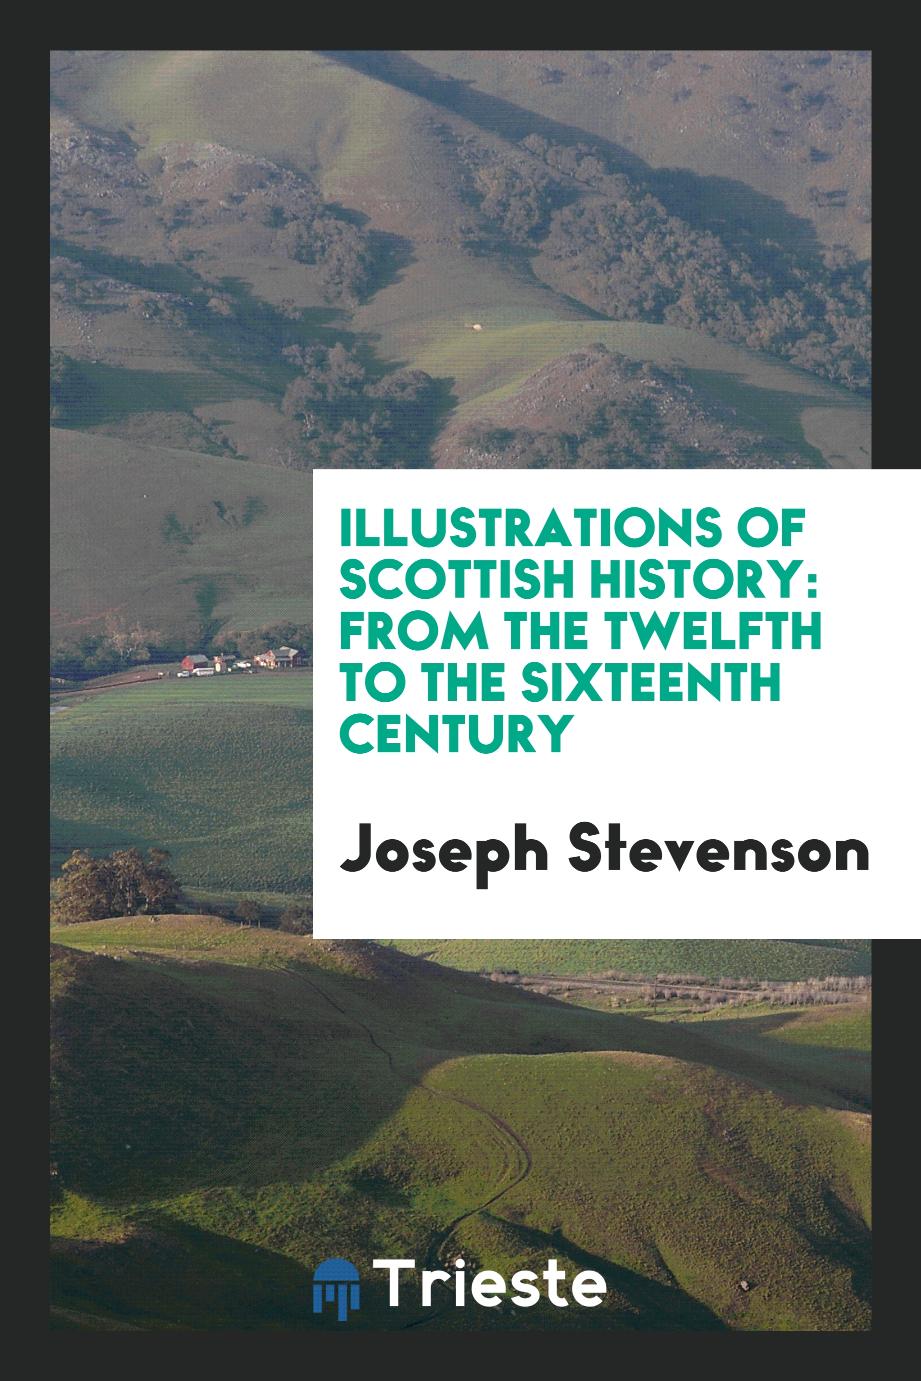 Illustrations of Scottish History: From the Twelfth to the Sixteenth Century